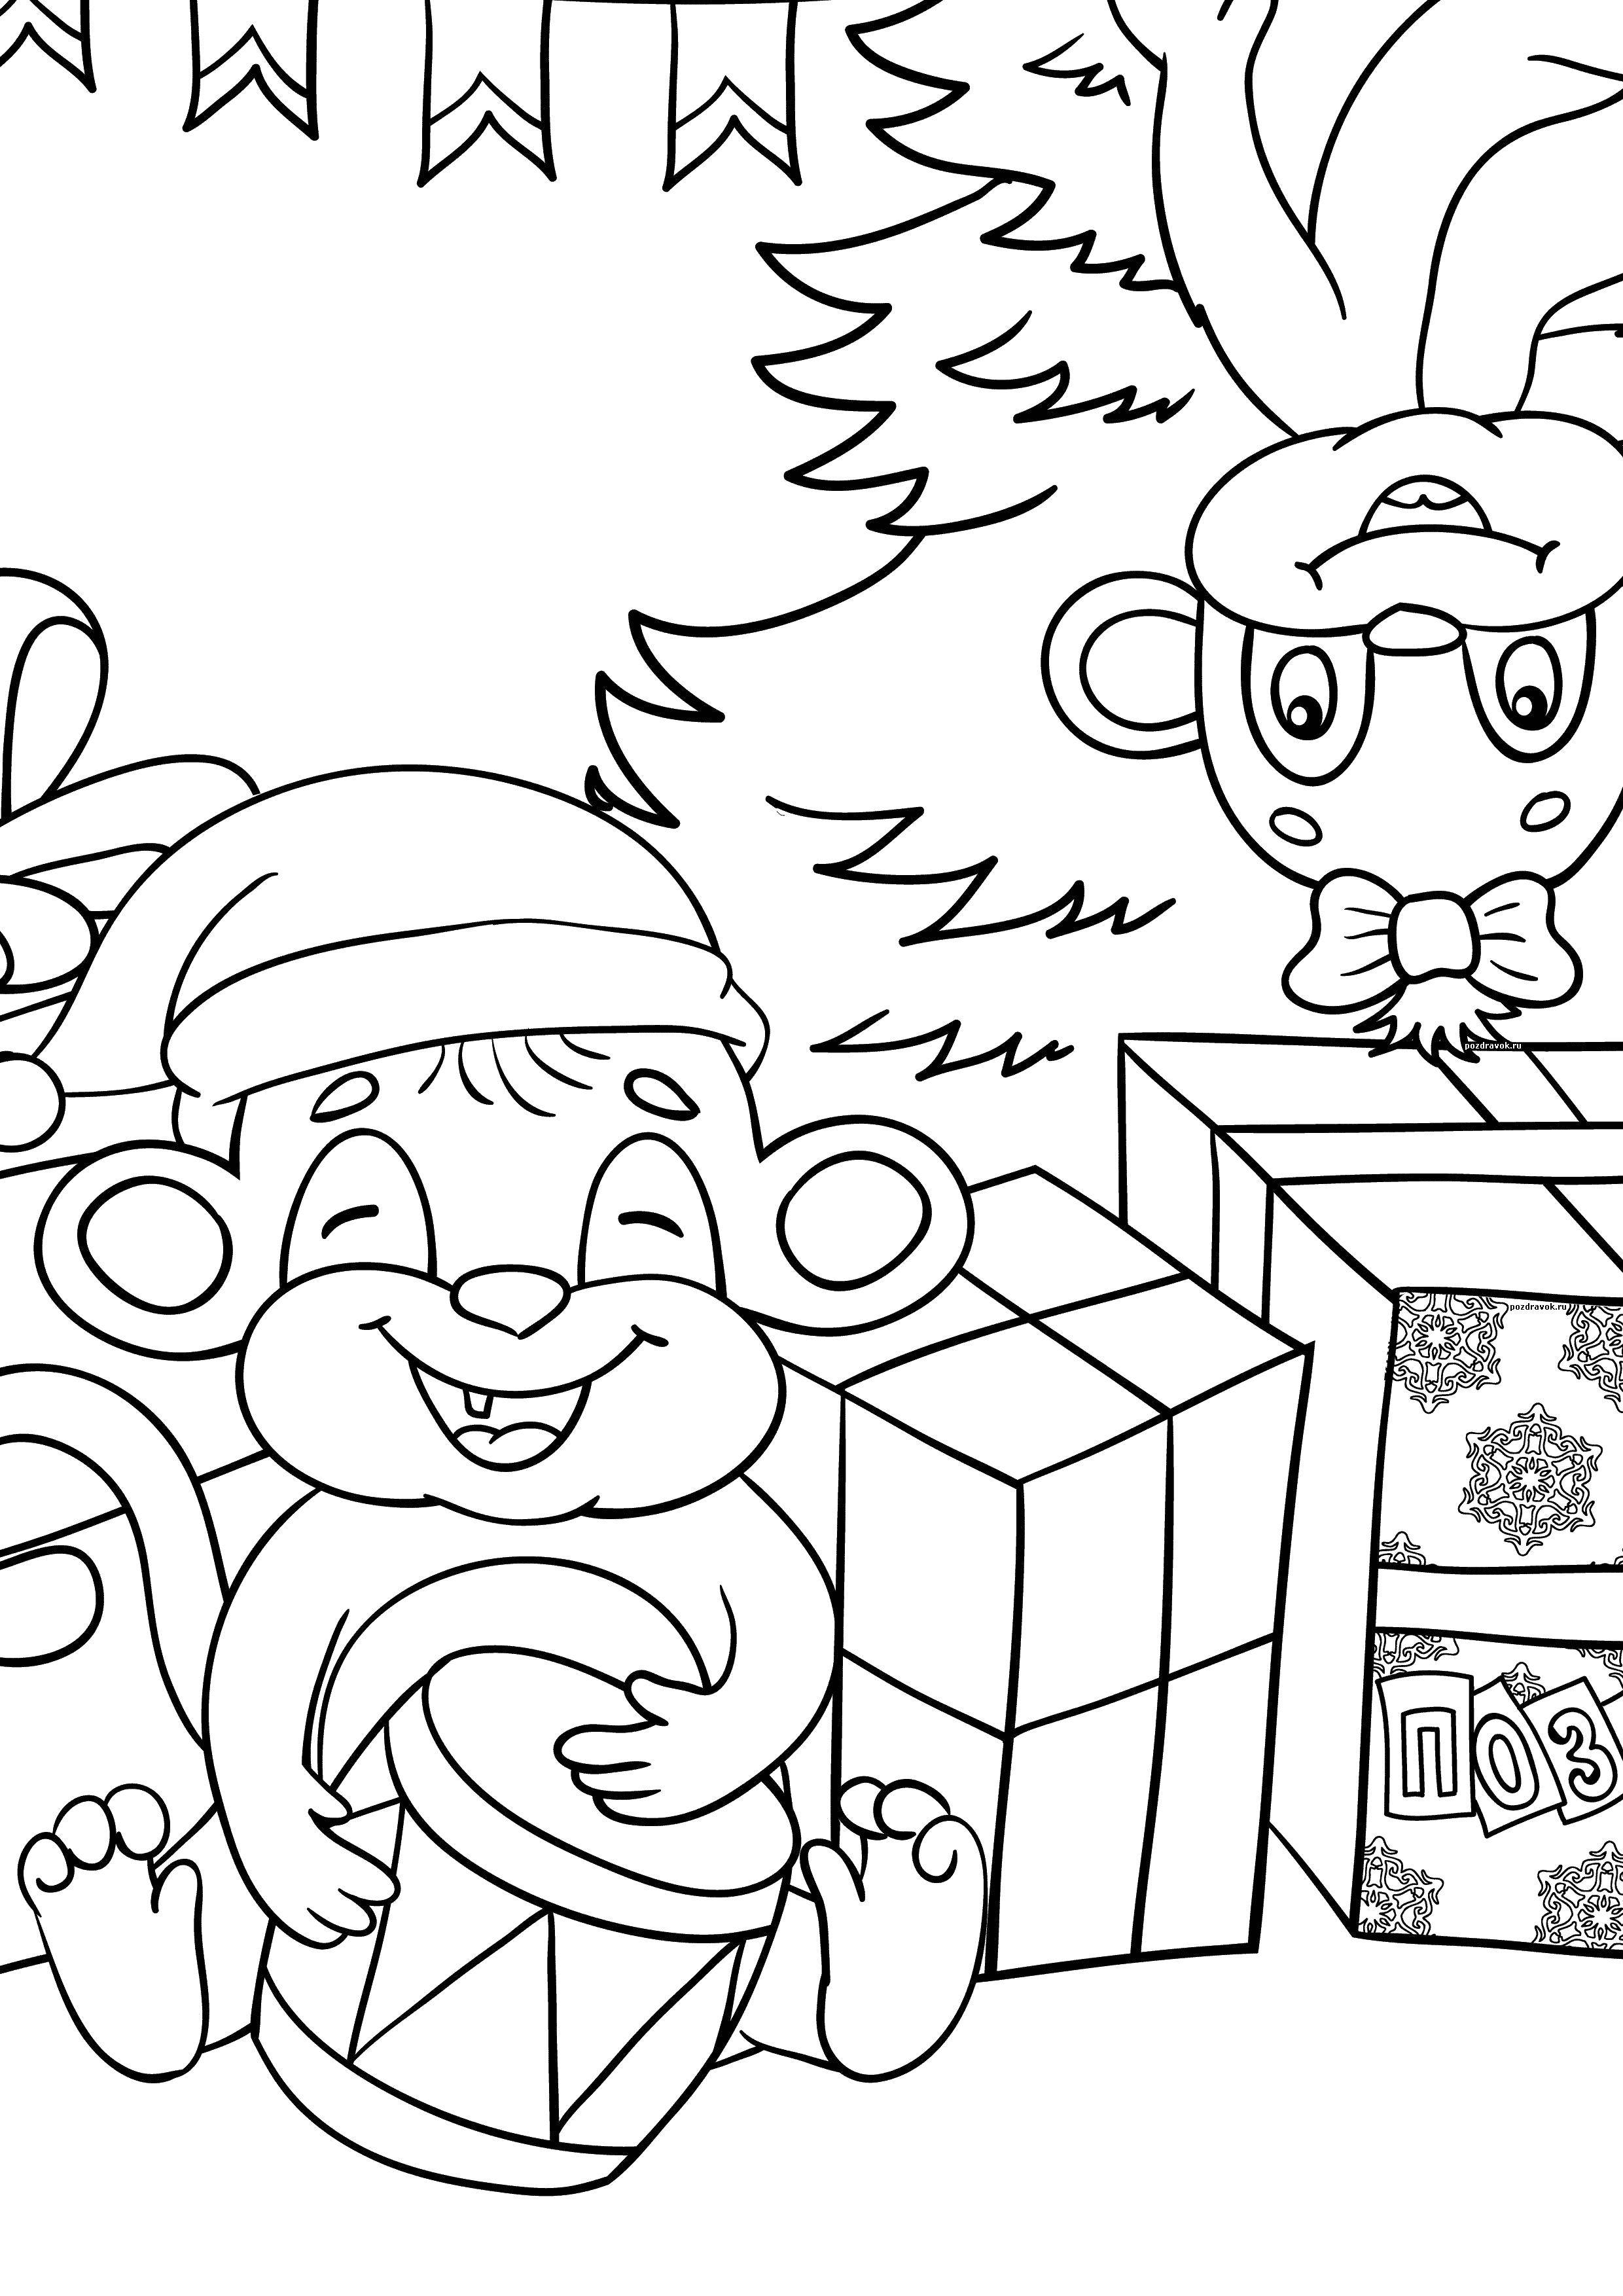 Coloring Monkey with gifts. Category new year. Tags:  New Year, gifts.